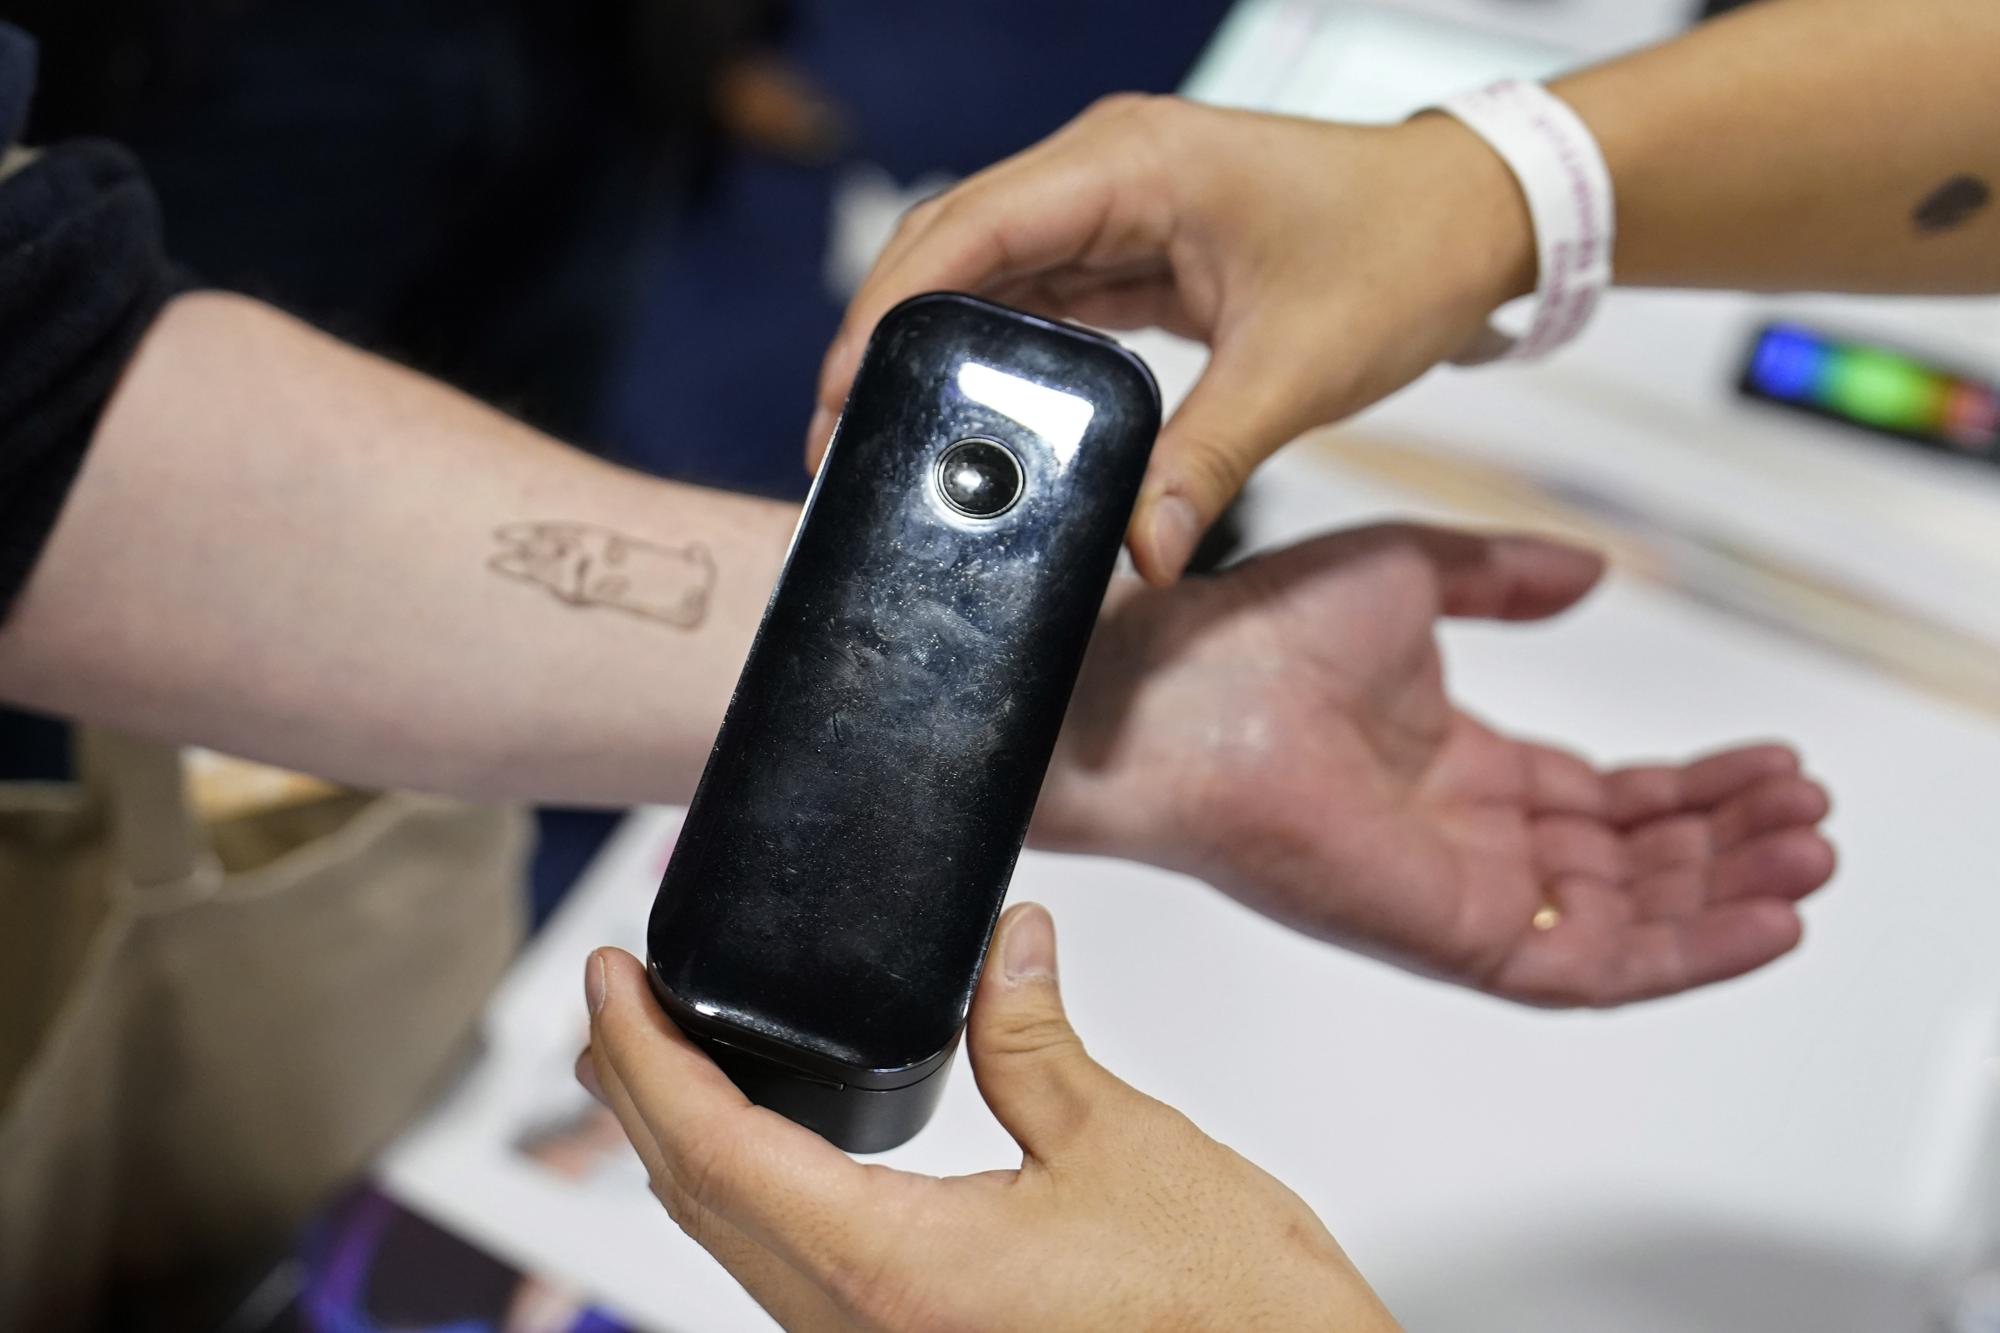 A temporary tattoo with a Prinker digital temporary tattoo device during CES Unveiled. /AP